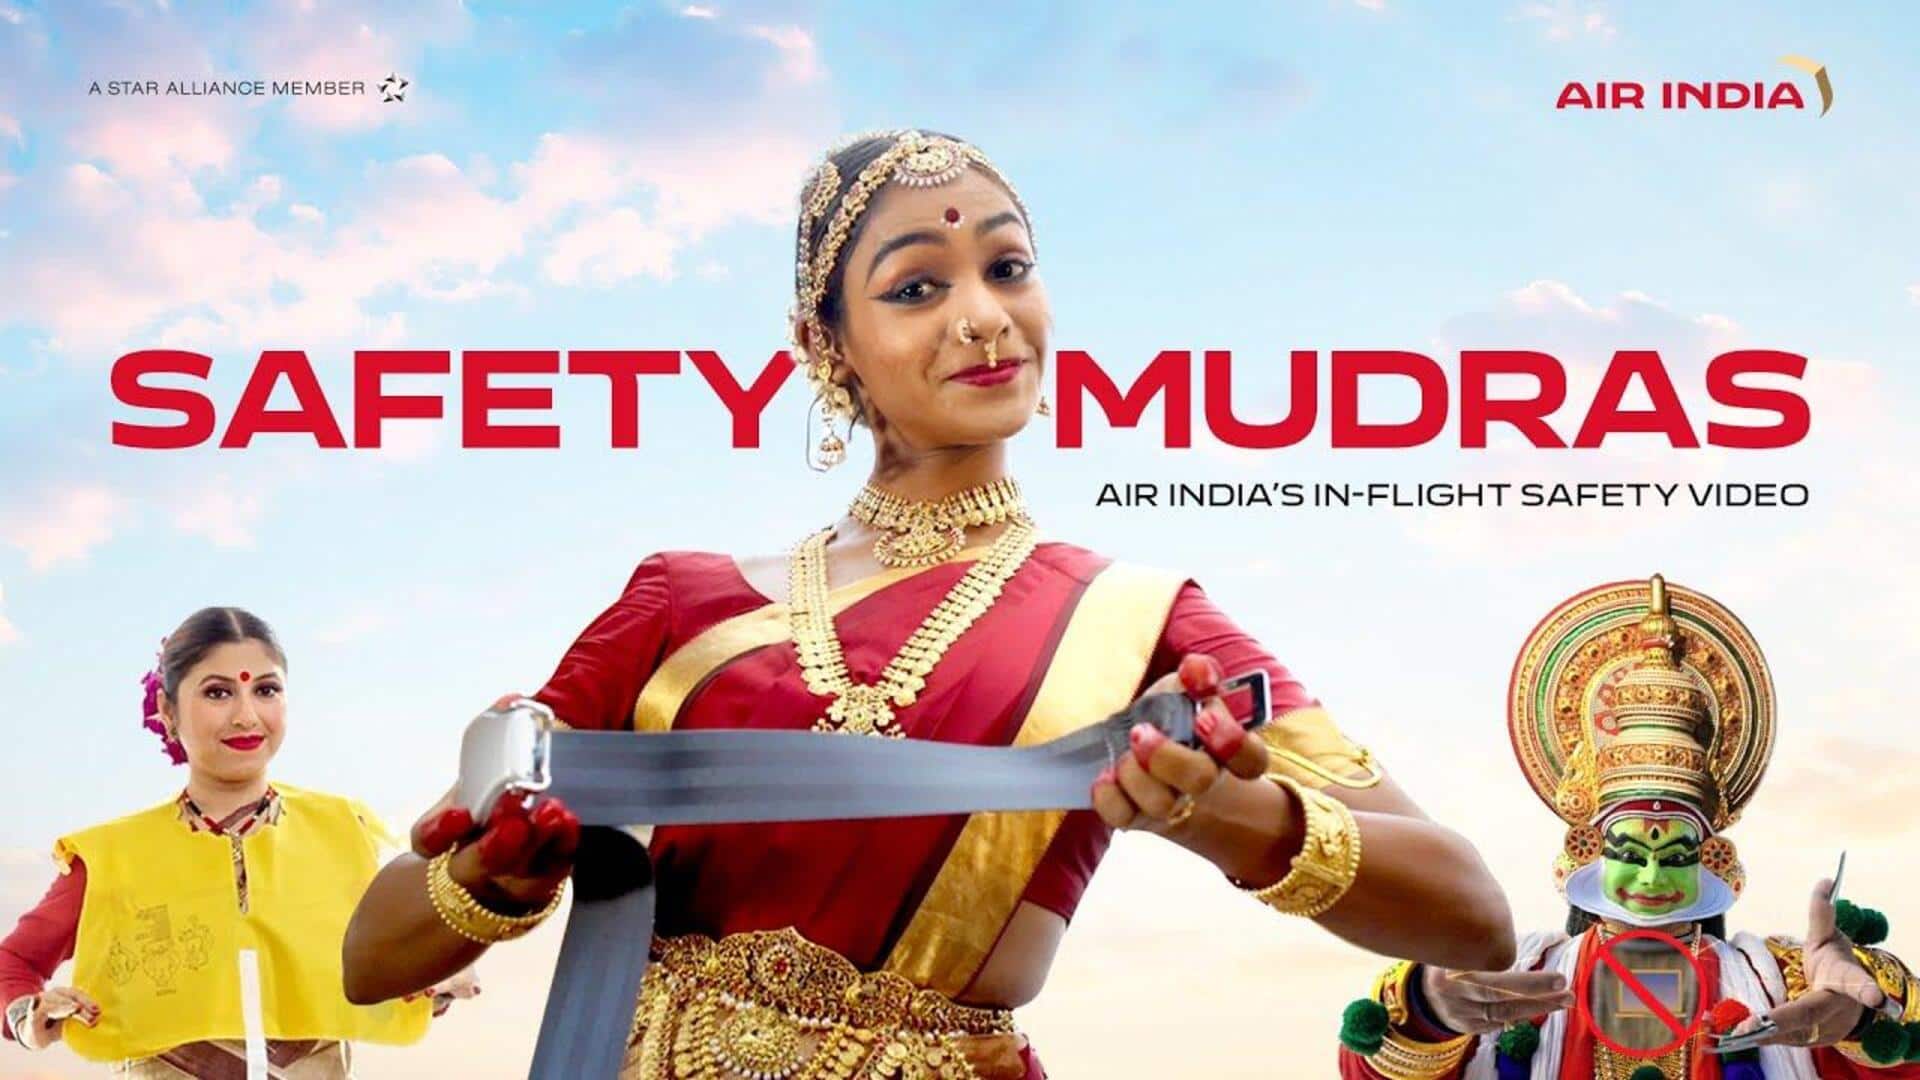 Air India's latest inflight safety video celebrates Indian dance forms